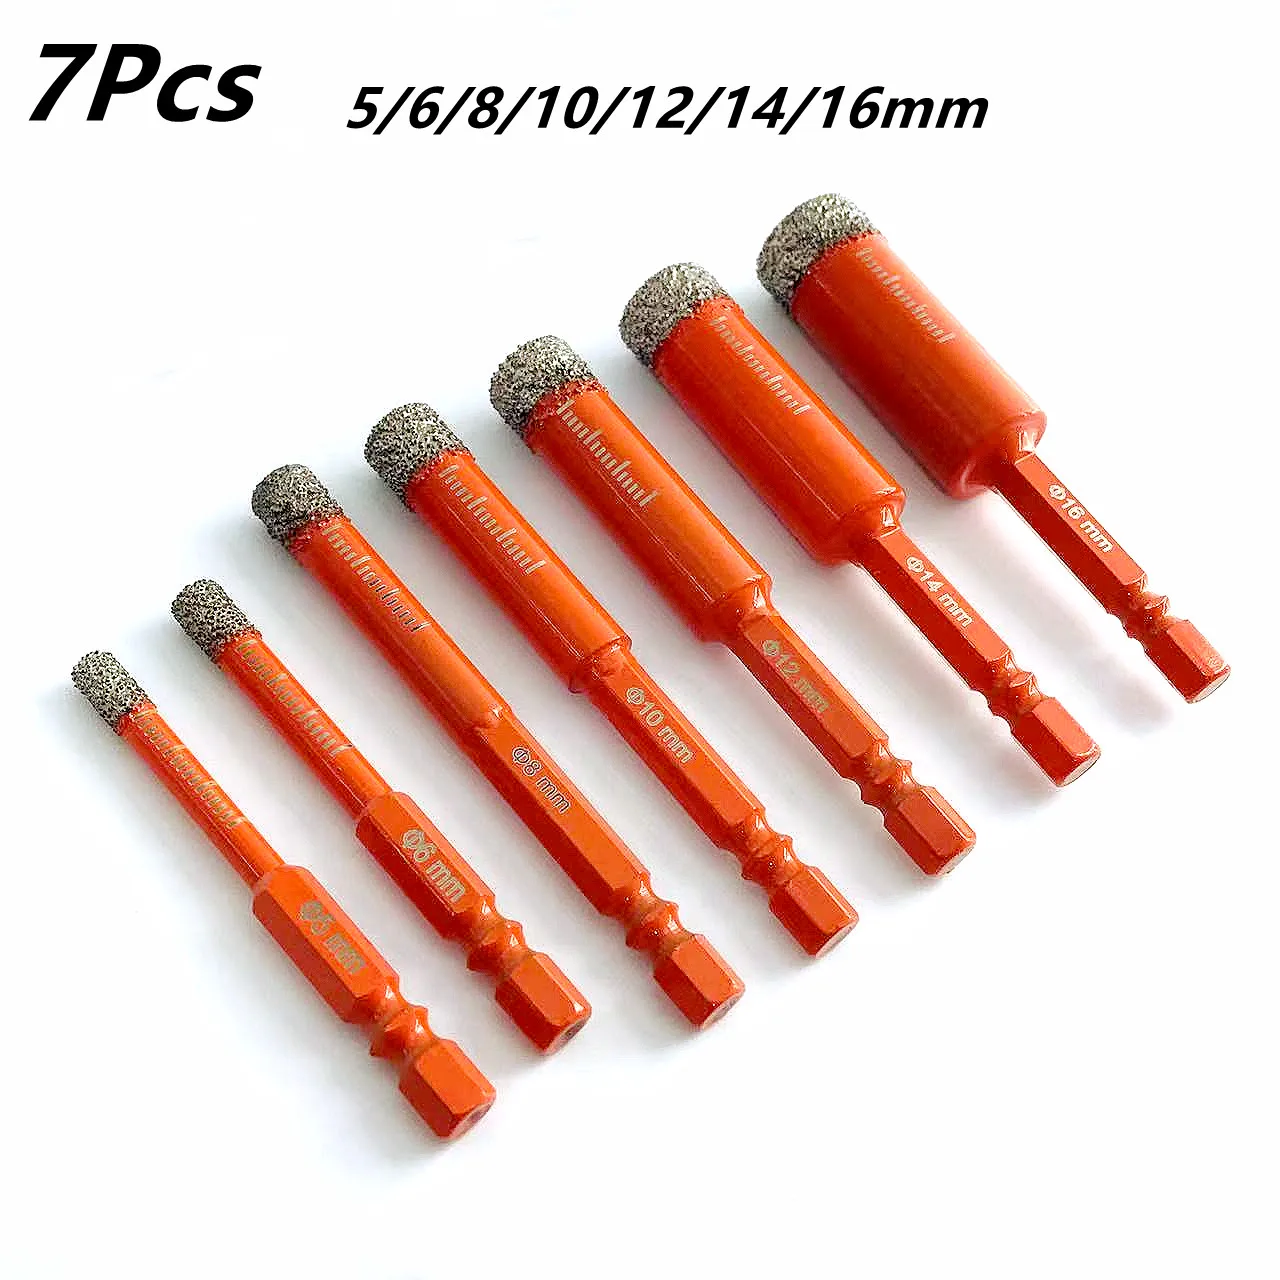 Dry Diamond Drill Bits Set for Granite Ceramic Marble Tile Stone Glass Hard Material Hex Shank Masonry Hole Saw Drill Bit 5-16mm vearter 5 6 8 10 12 14 16mm round shank vacuum brazed dry diamond drill bit masonry hole saw for tile marble granite ceramic